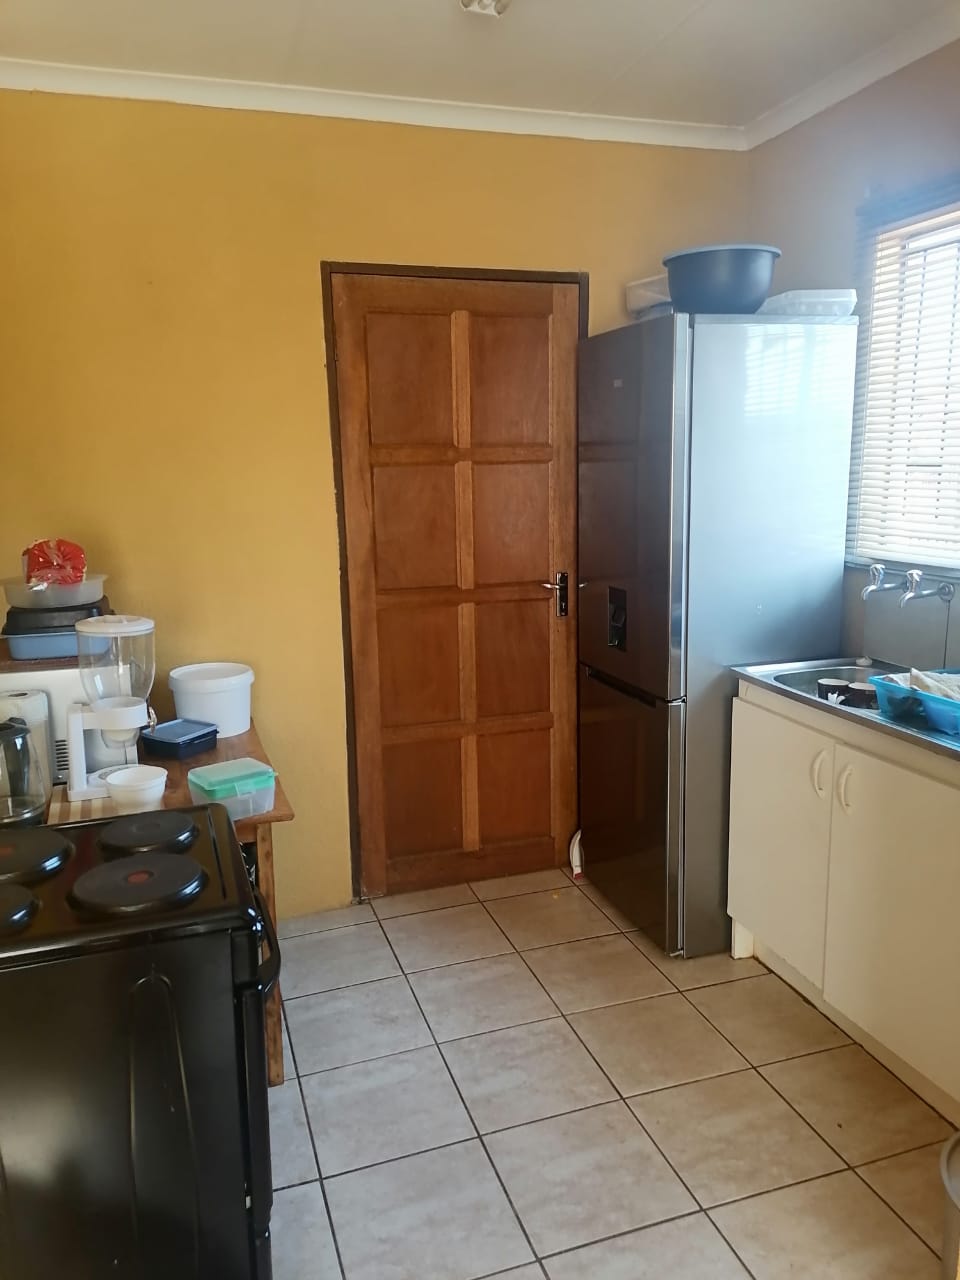 Two bedroom house available for rental 